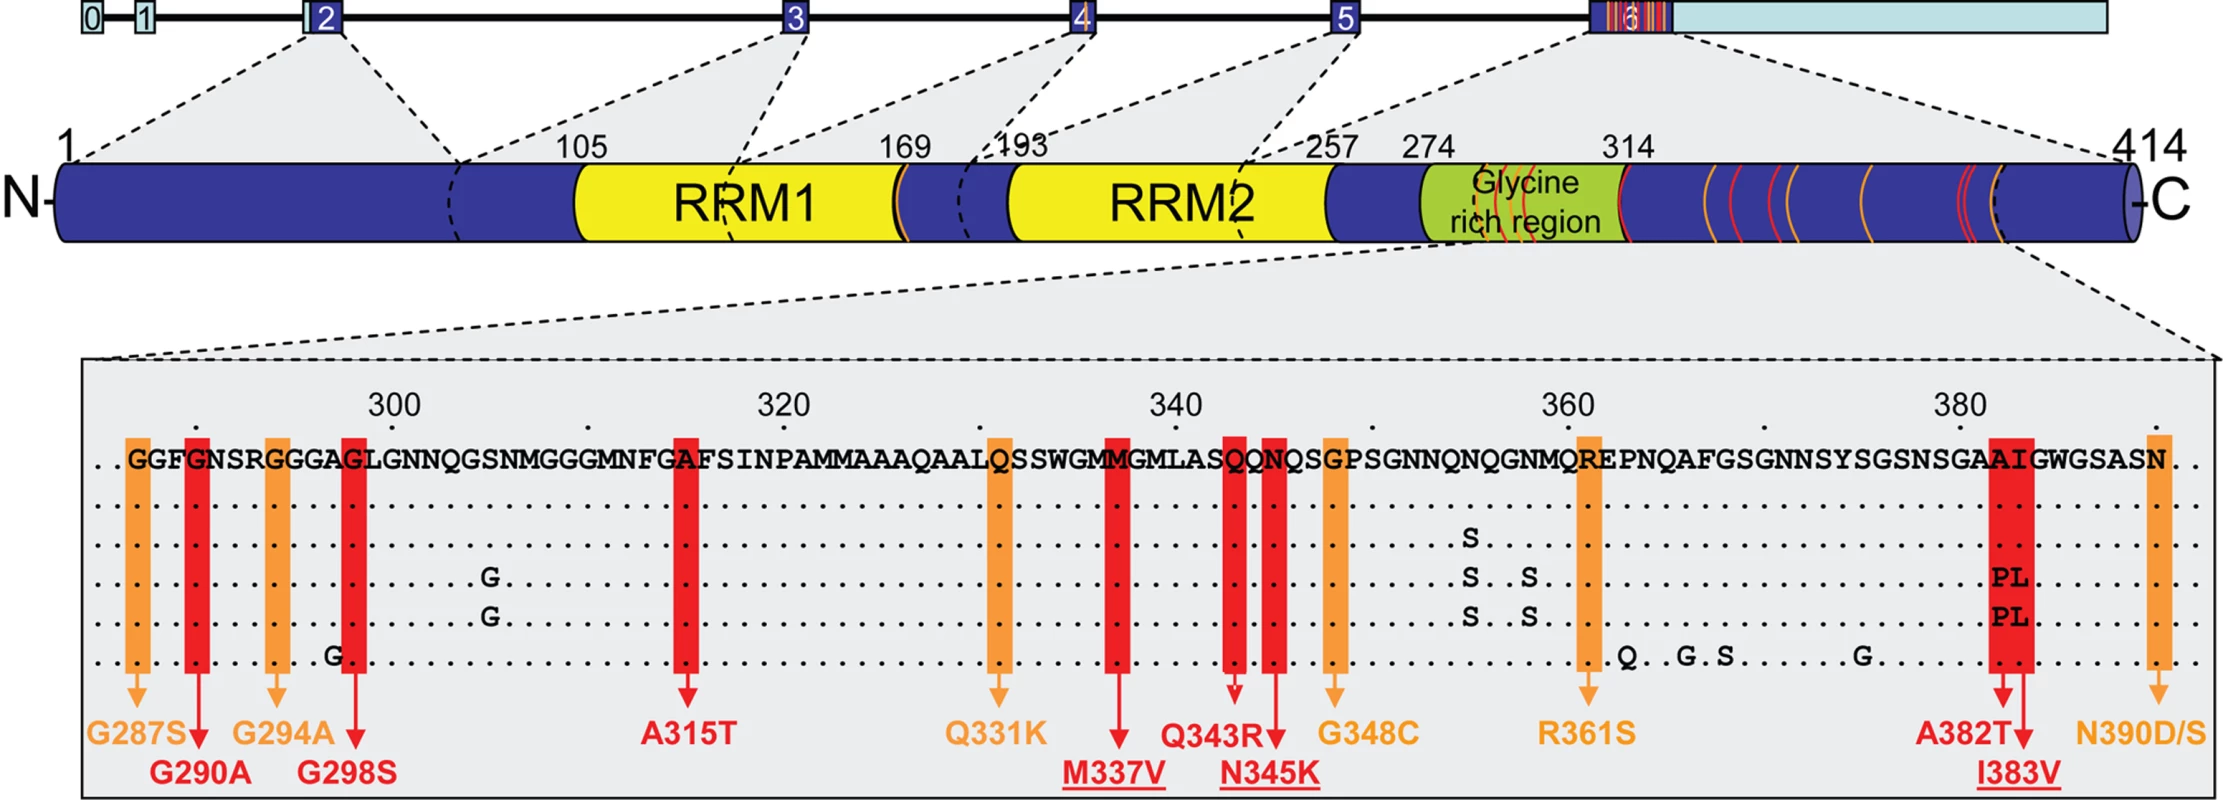 Overview of mutations identified to date in <i>TARDBP</i>.